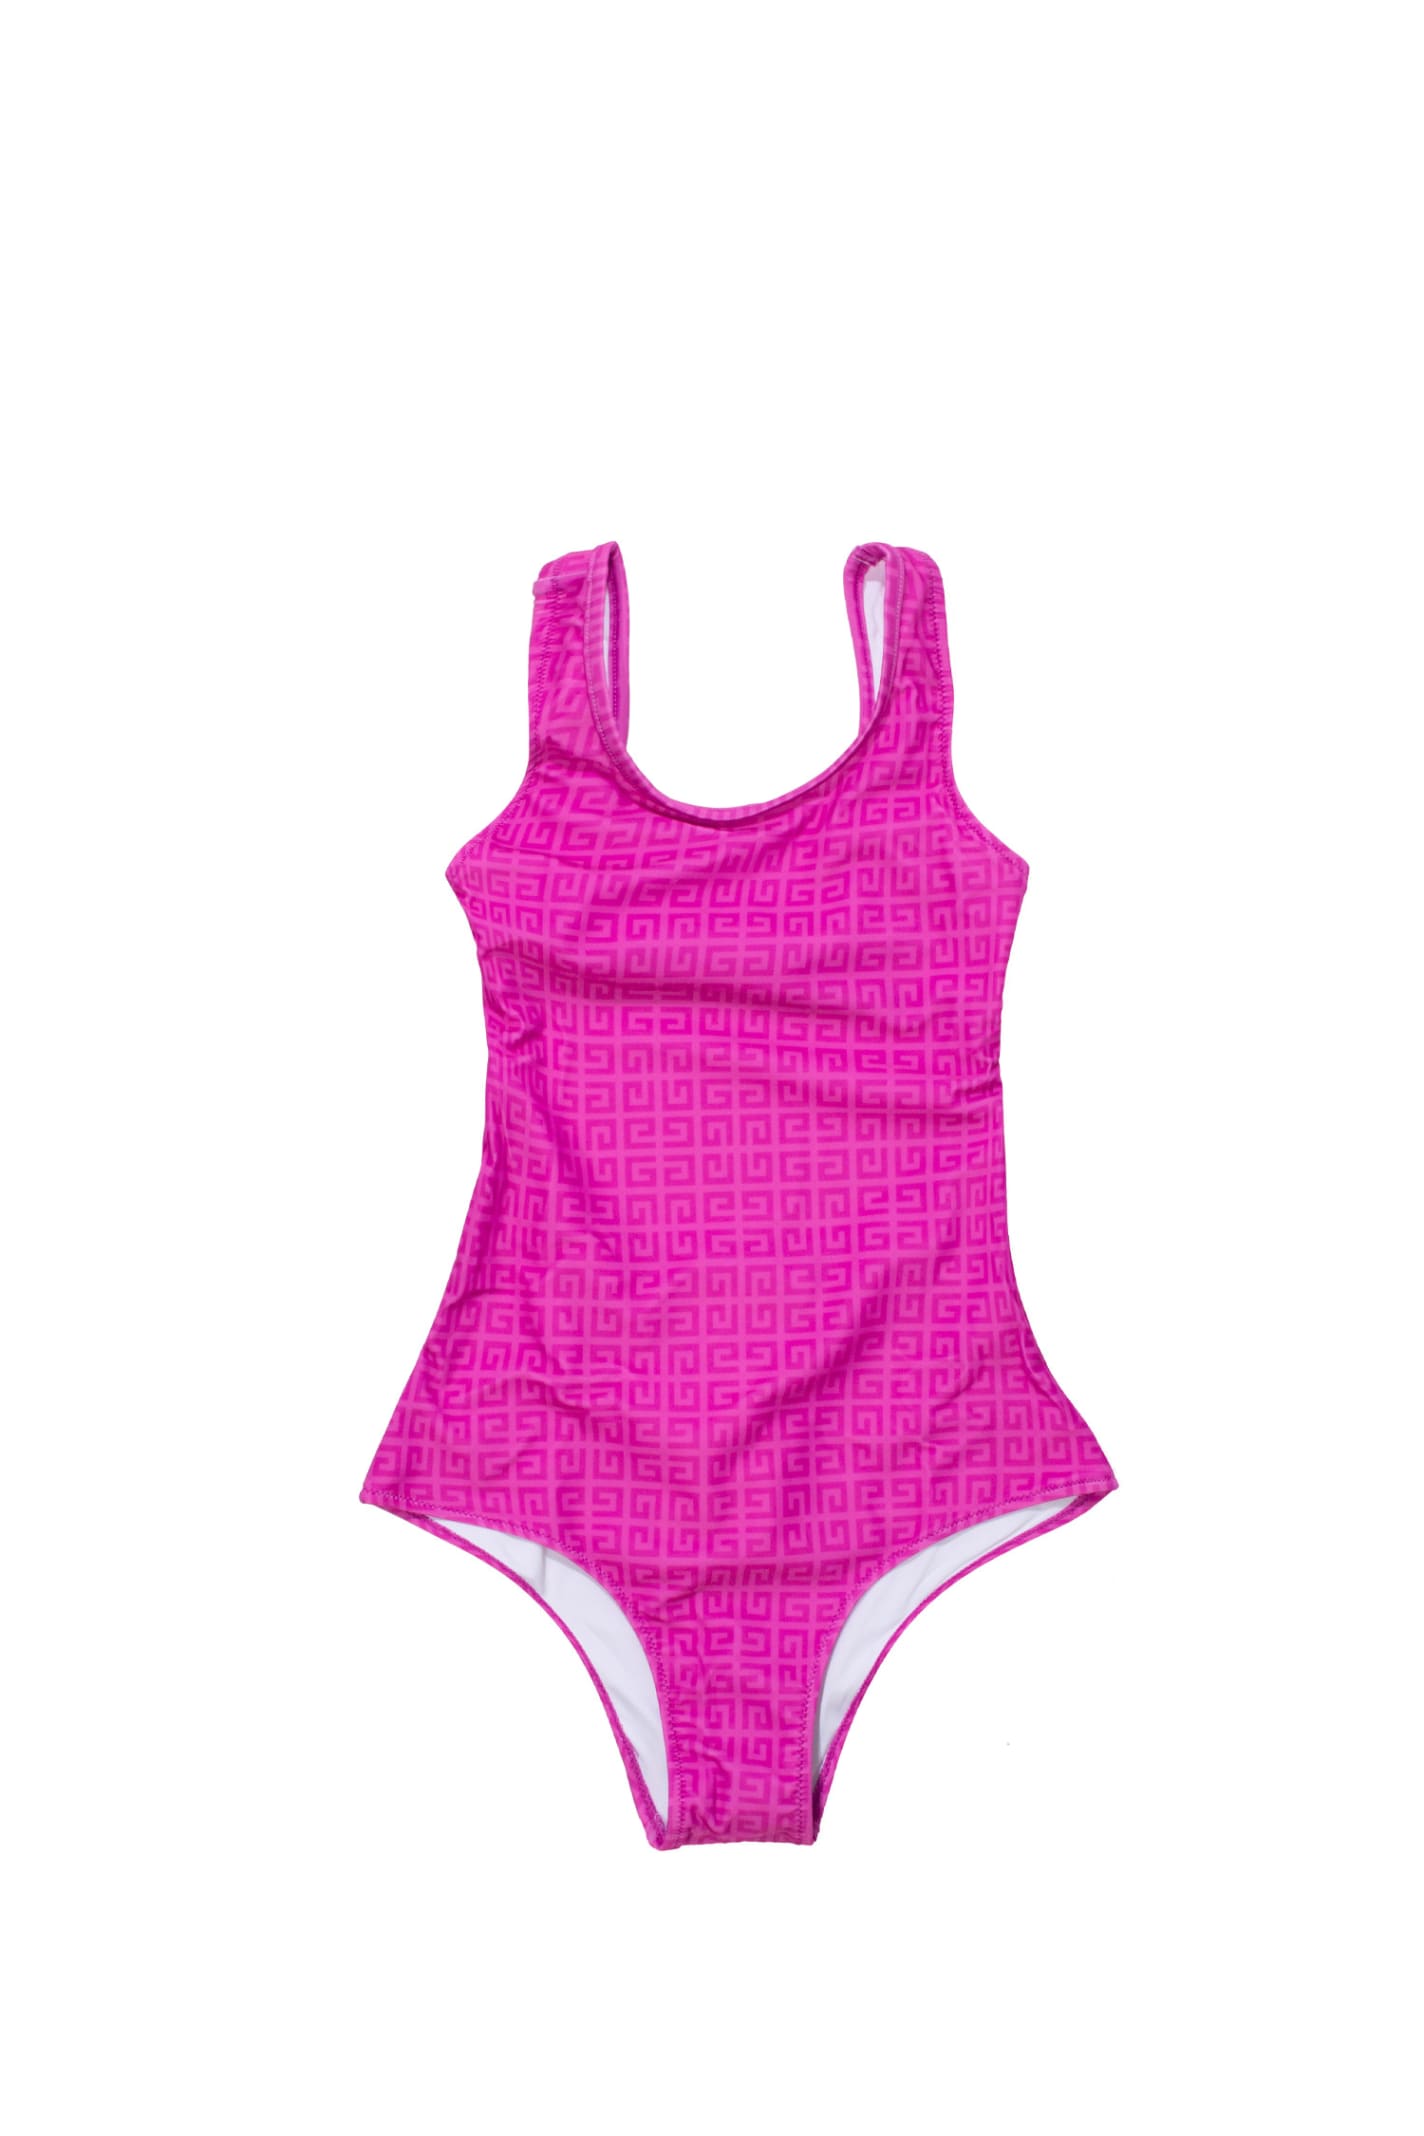 Givenchy Kids' Nylon One Piece Swimsuit In Fuchsia